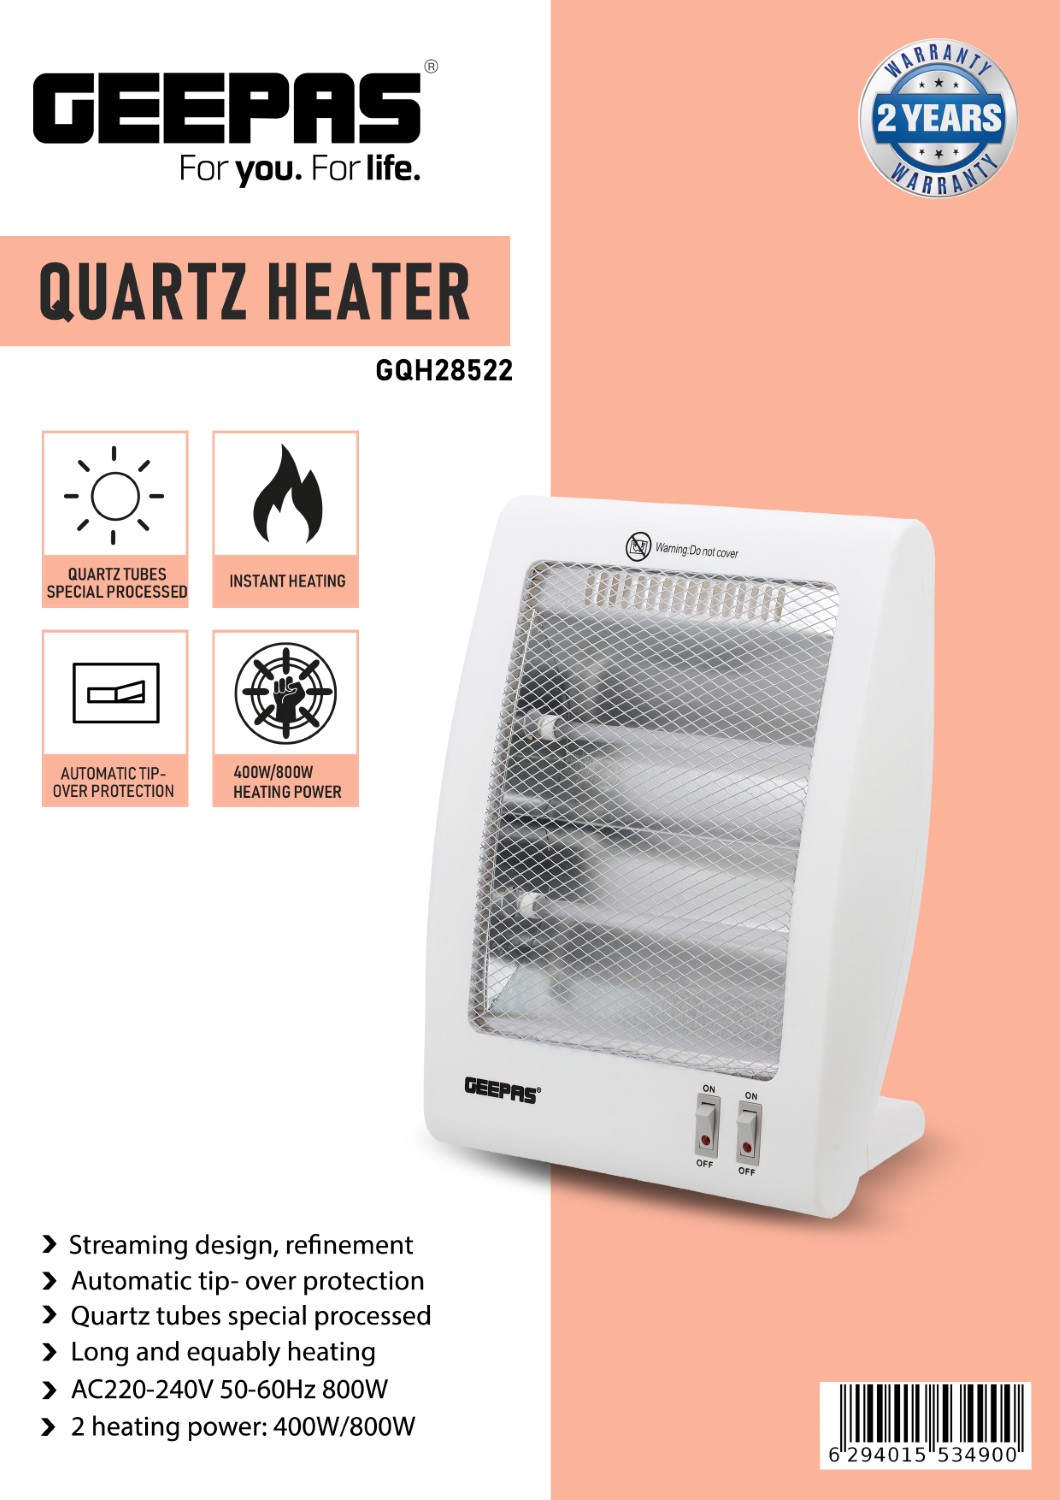 Electric Quartz Room & Office Heater 400W to 800W with safety tip